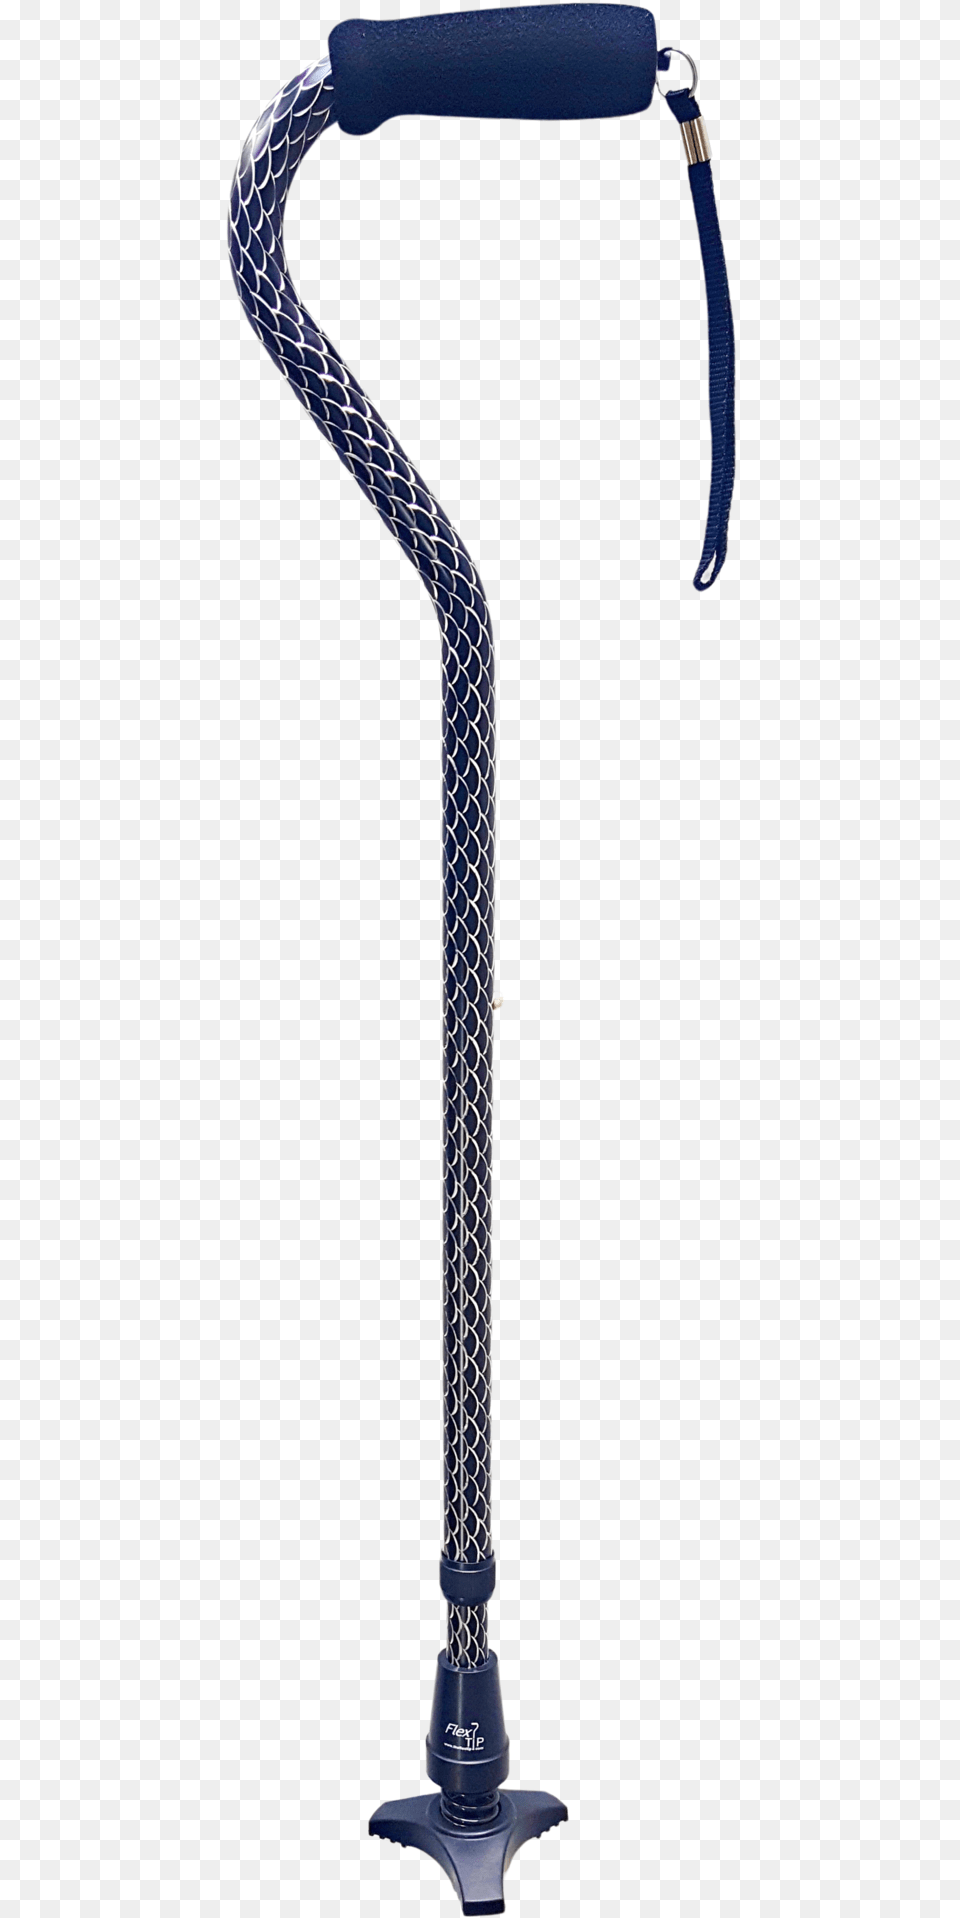 Chain, Cane, Stick, Accessories, Jewelry Png Image